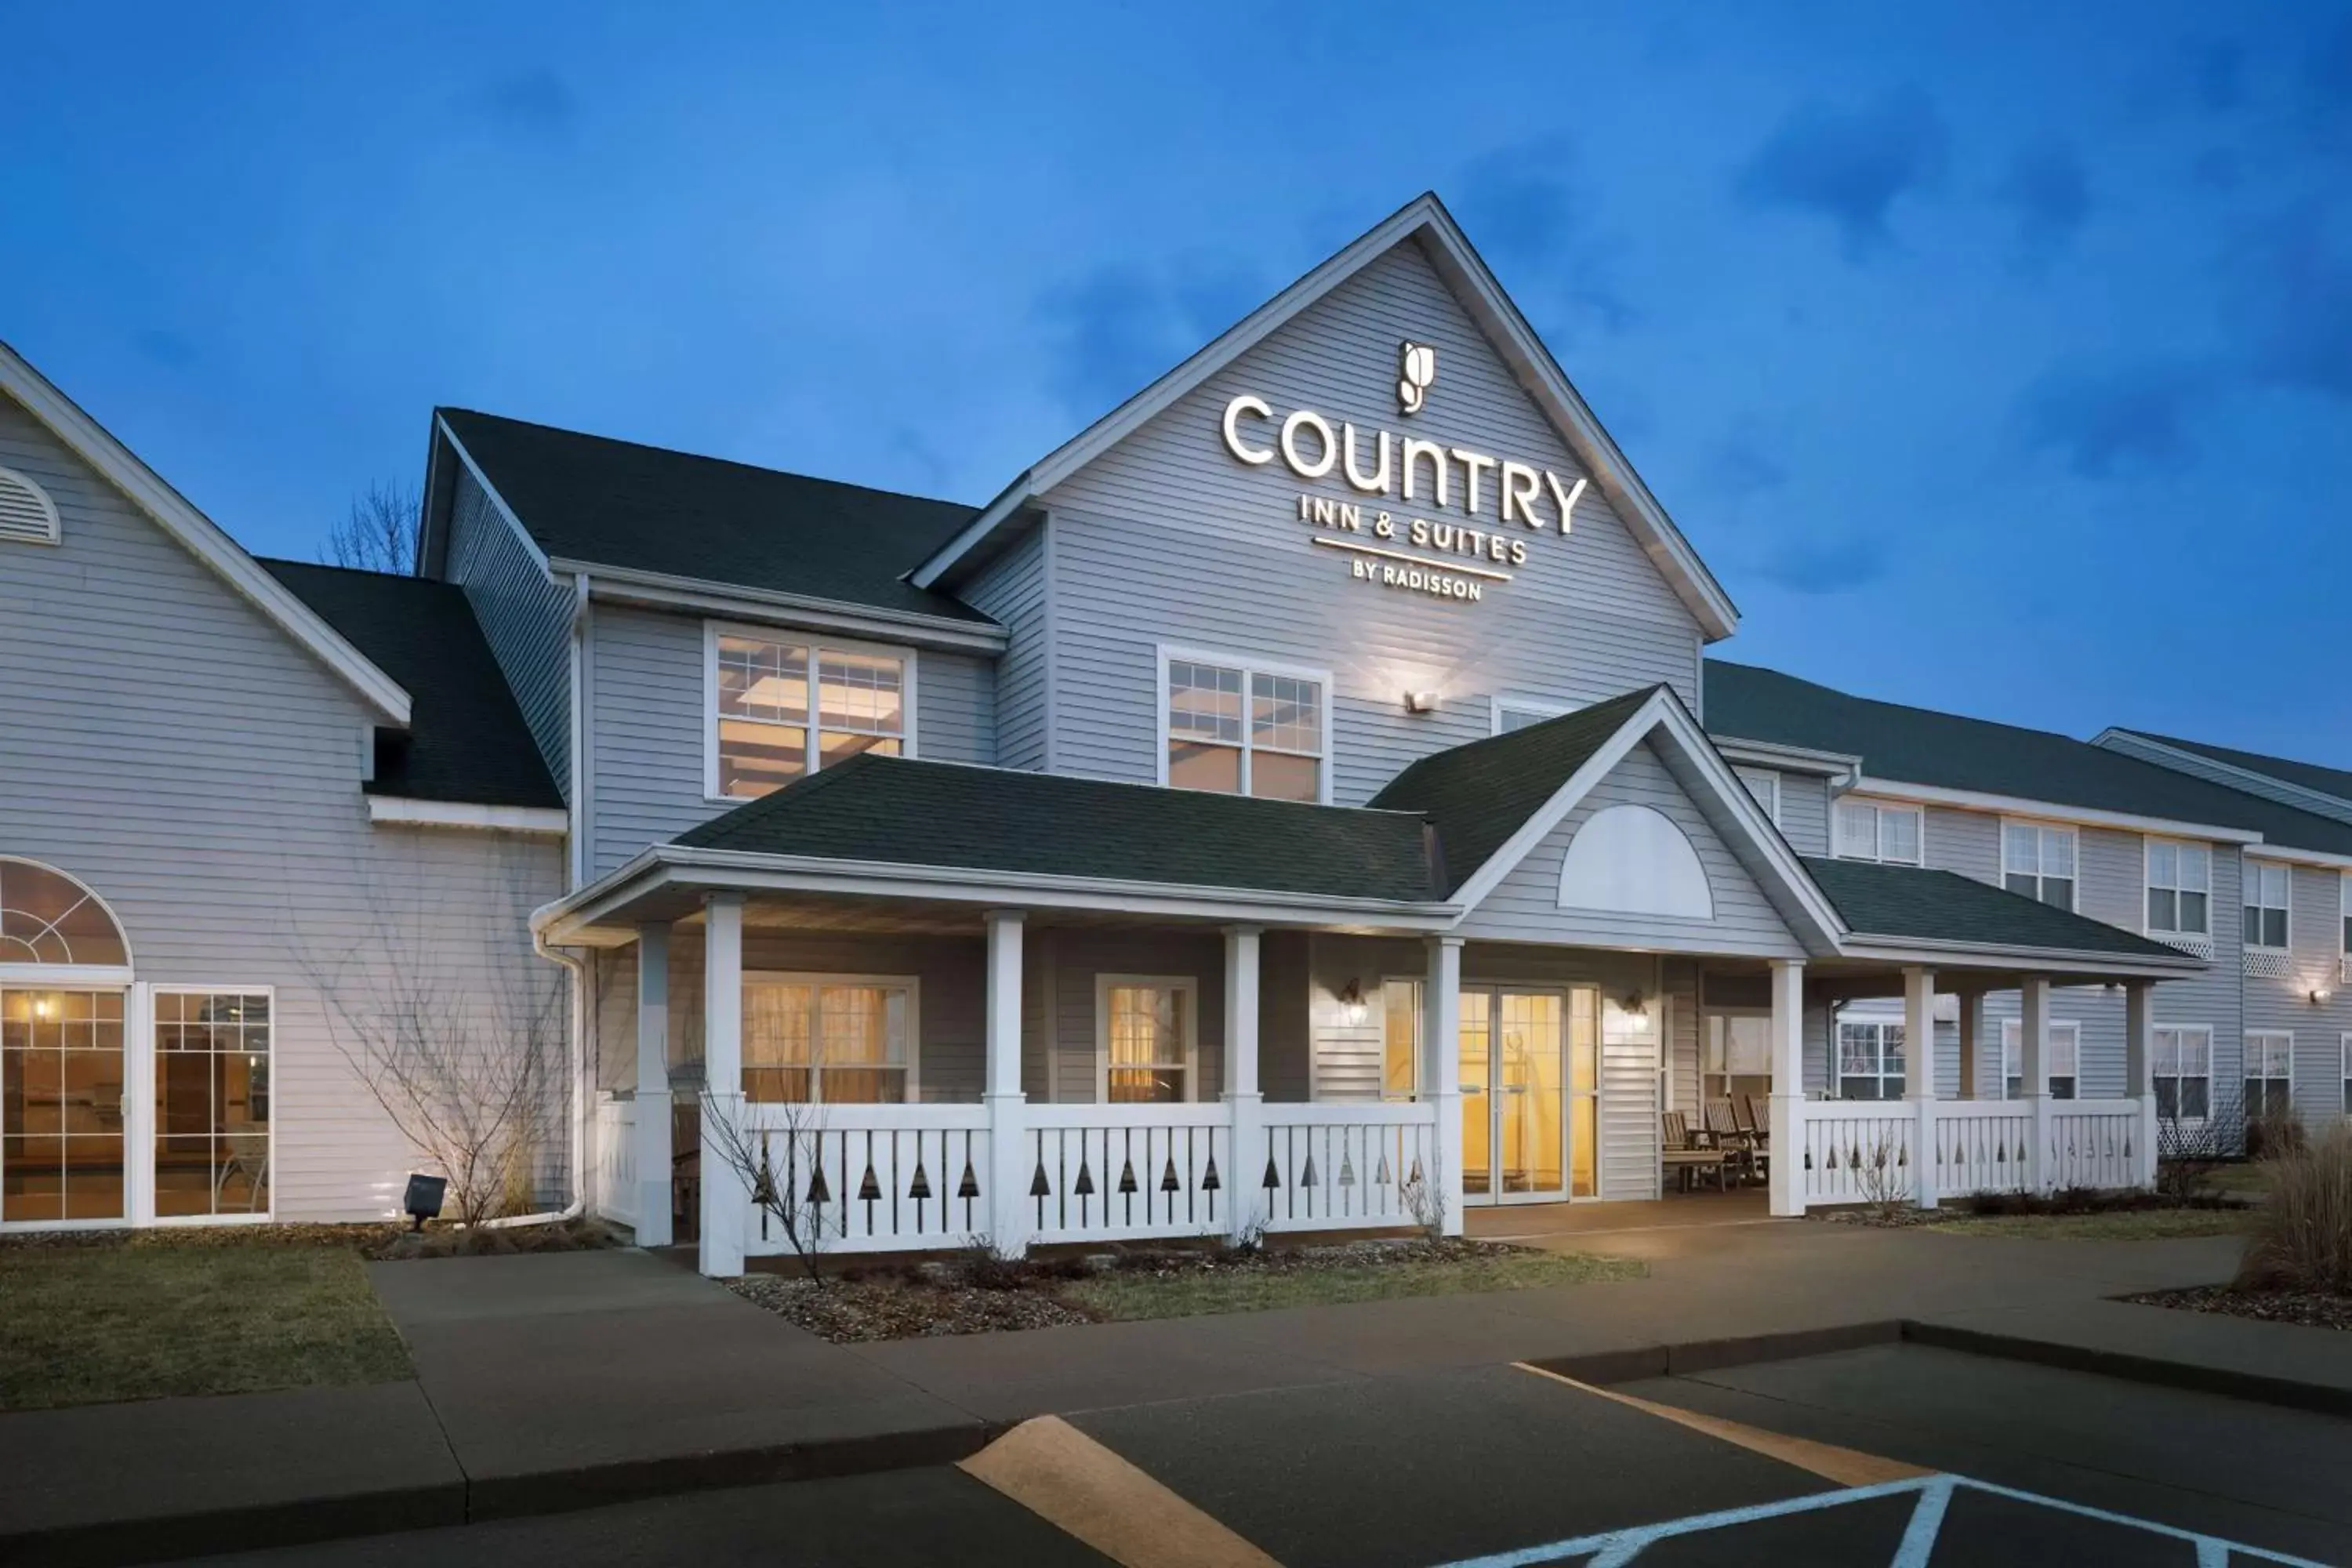 Property building in Country Inn & Suites by Radisson, Grinnell, IA